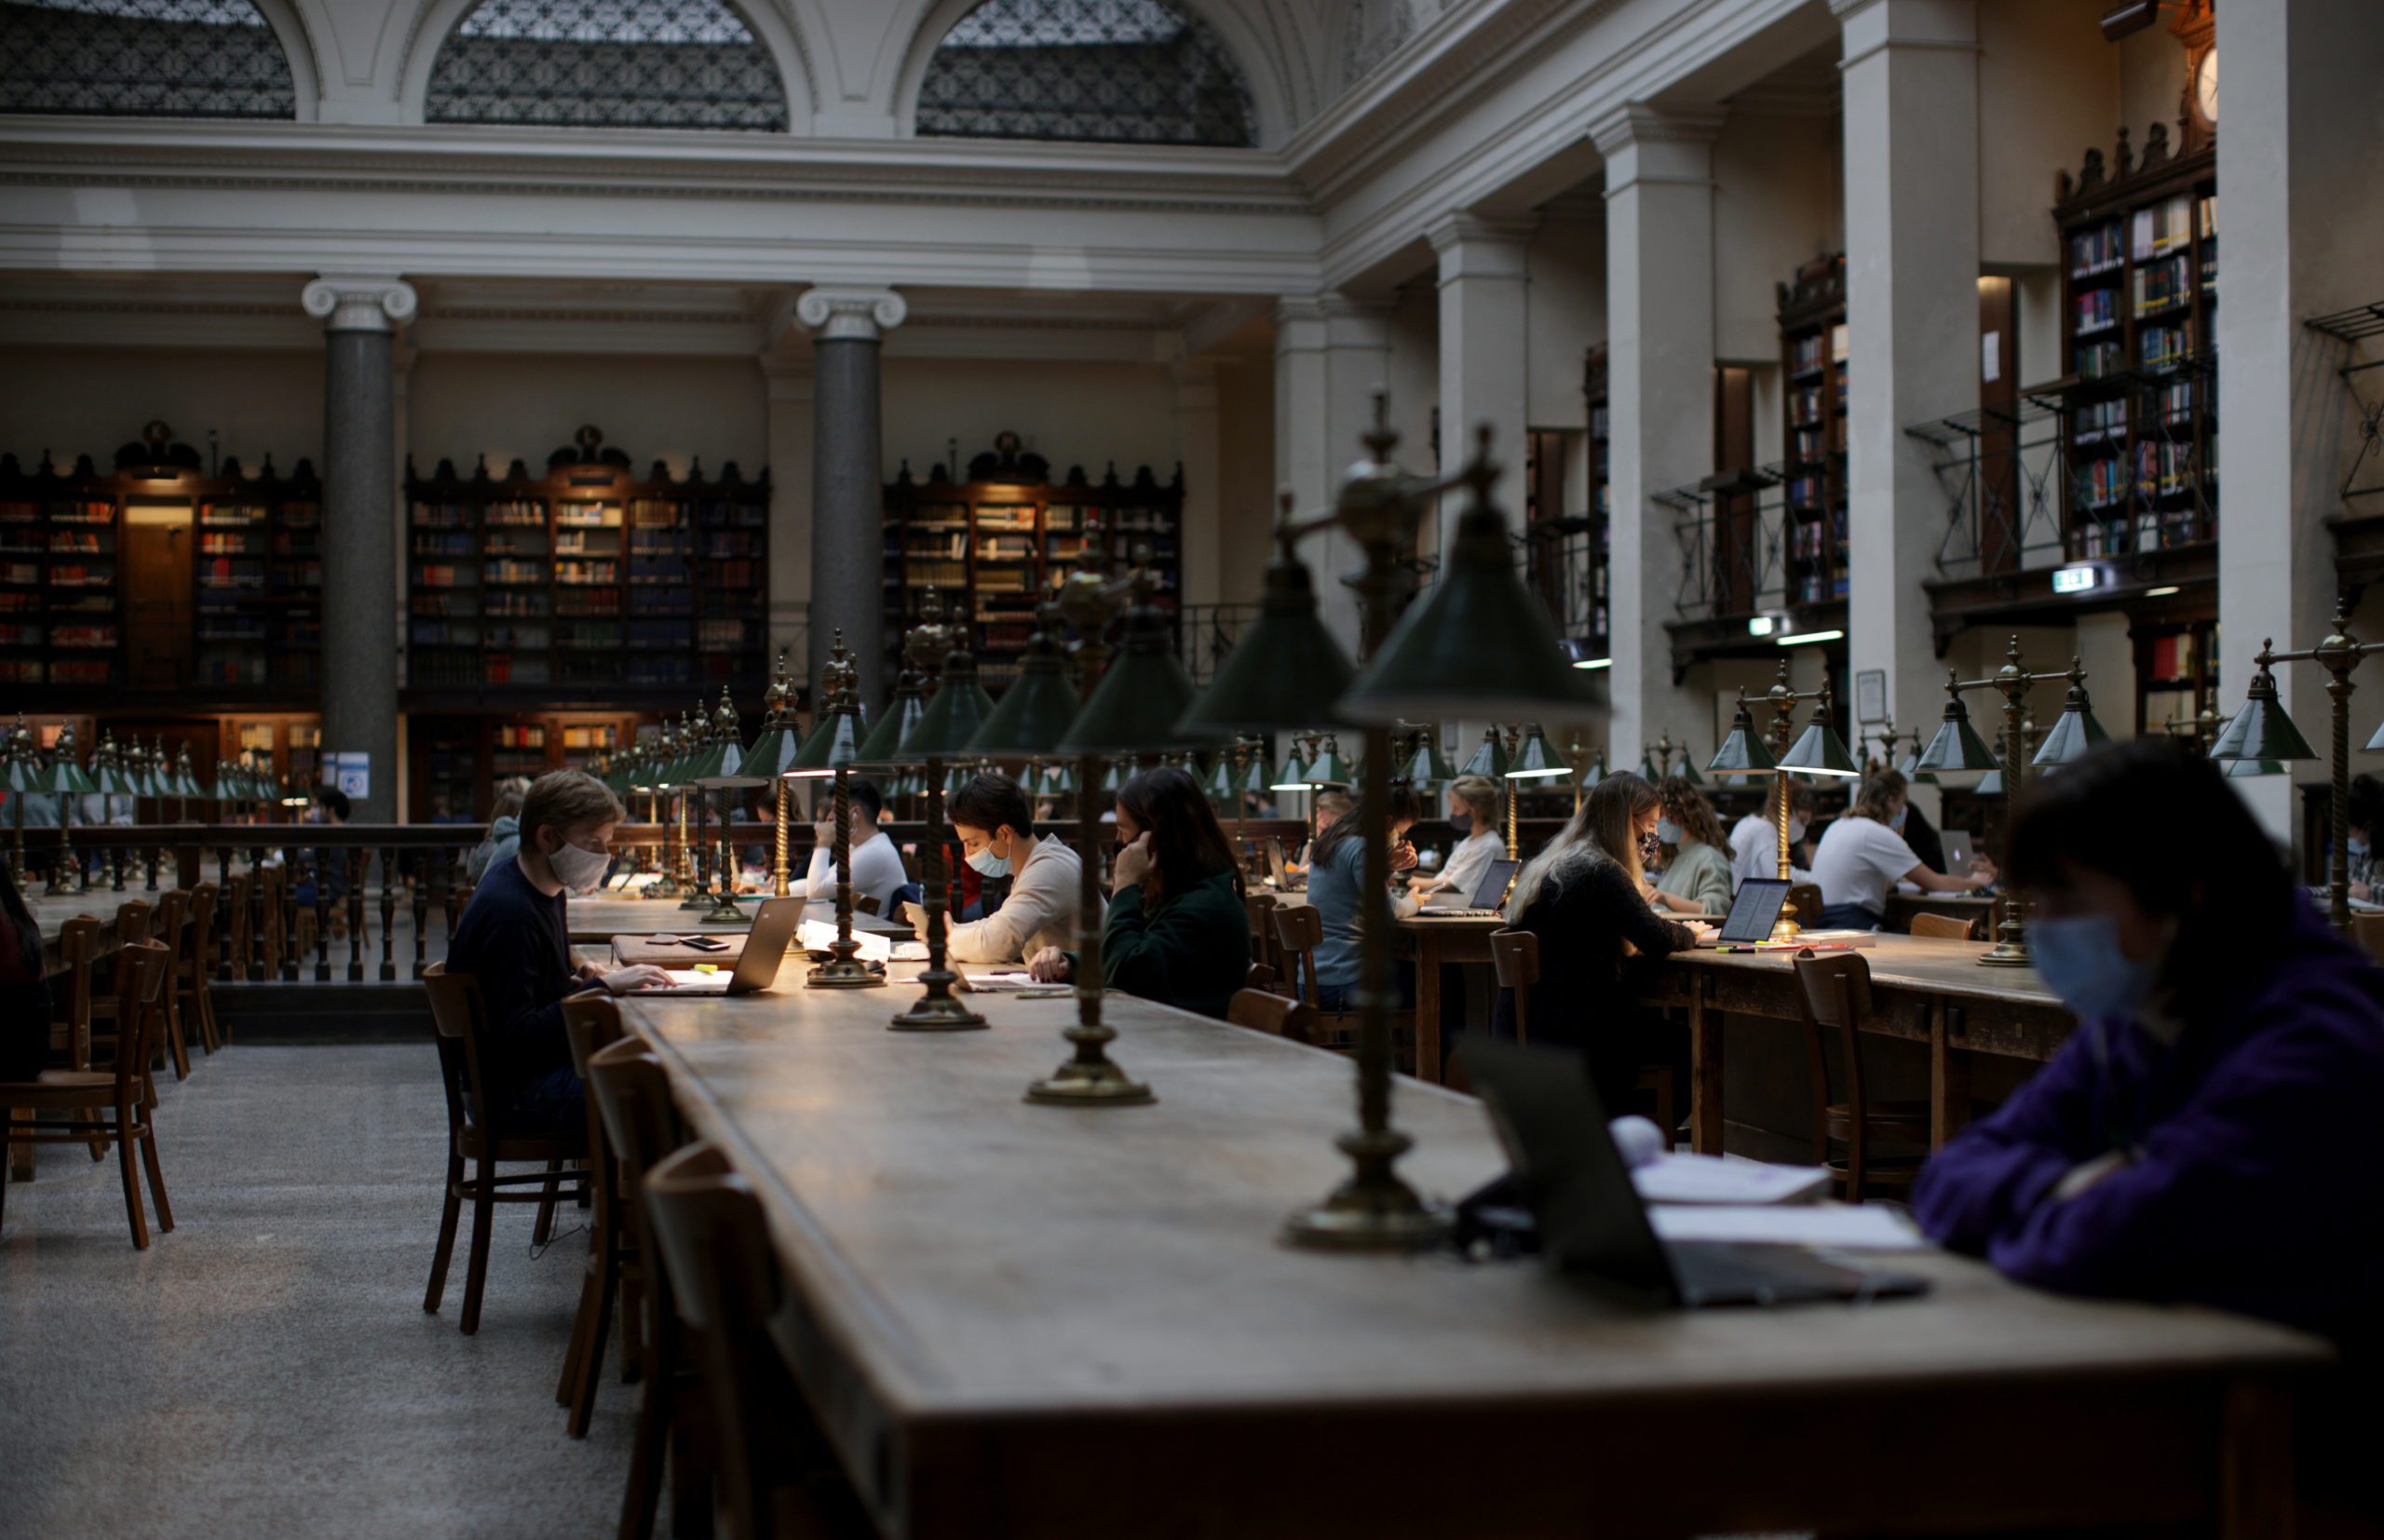 Students wearing face masks keep social distance as they study at the large reading room of Vienna University Library amid the coronavirus disease (COVID-19) outbreak, in Vienna, Austria, October 21, 2020. REUTERS/Lisi Niesner - RC2ZMJ9UD5B1